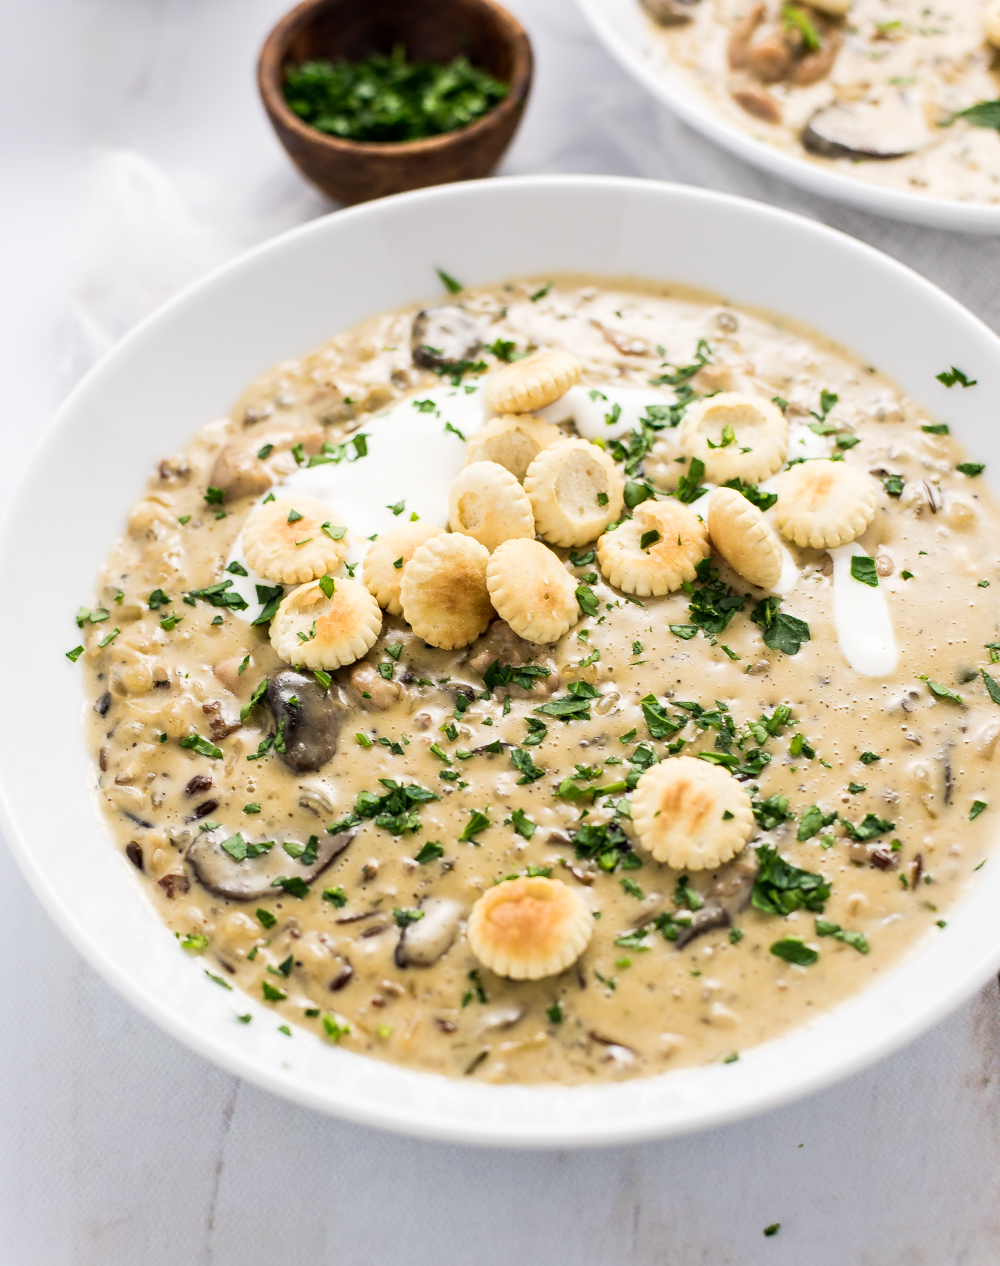 Cream of Mushroom, Wild Rice and Chicken Soup is the perfect comfort food to serve just about any time of year!